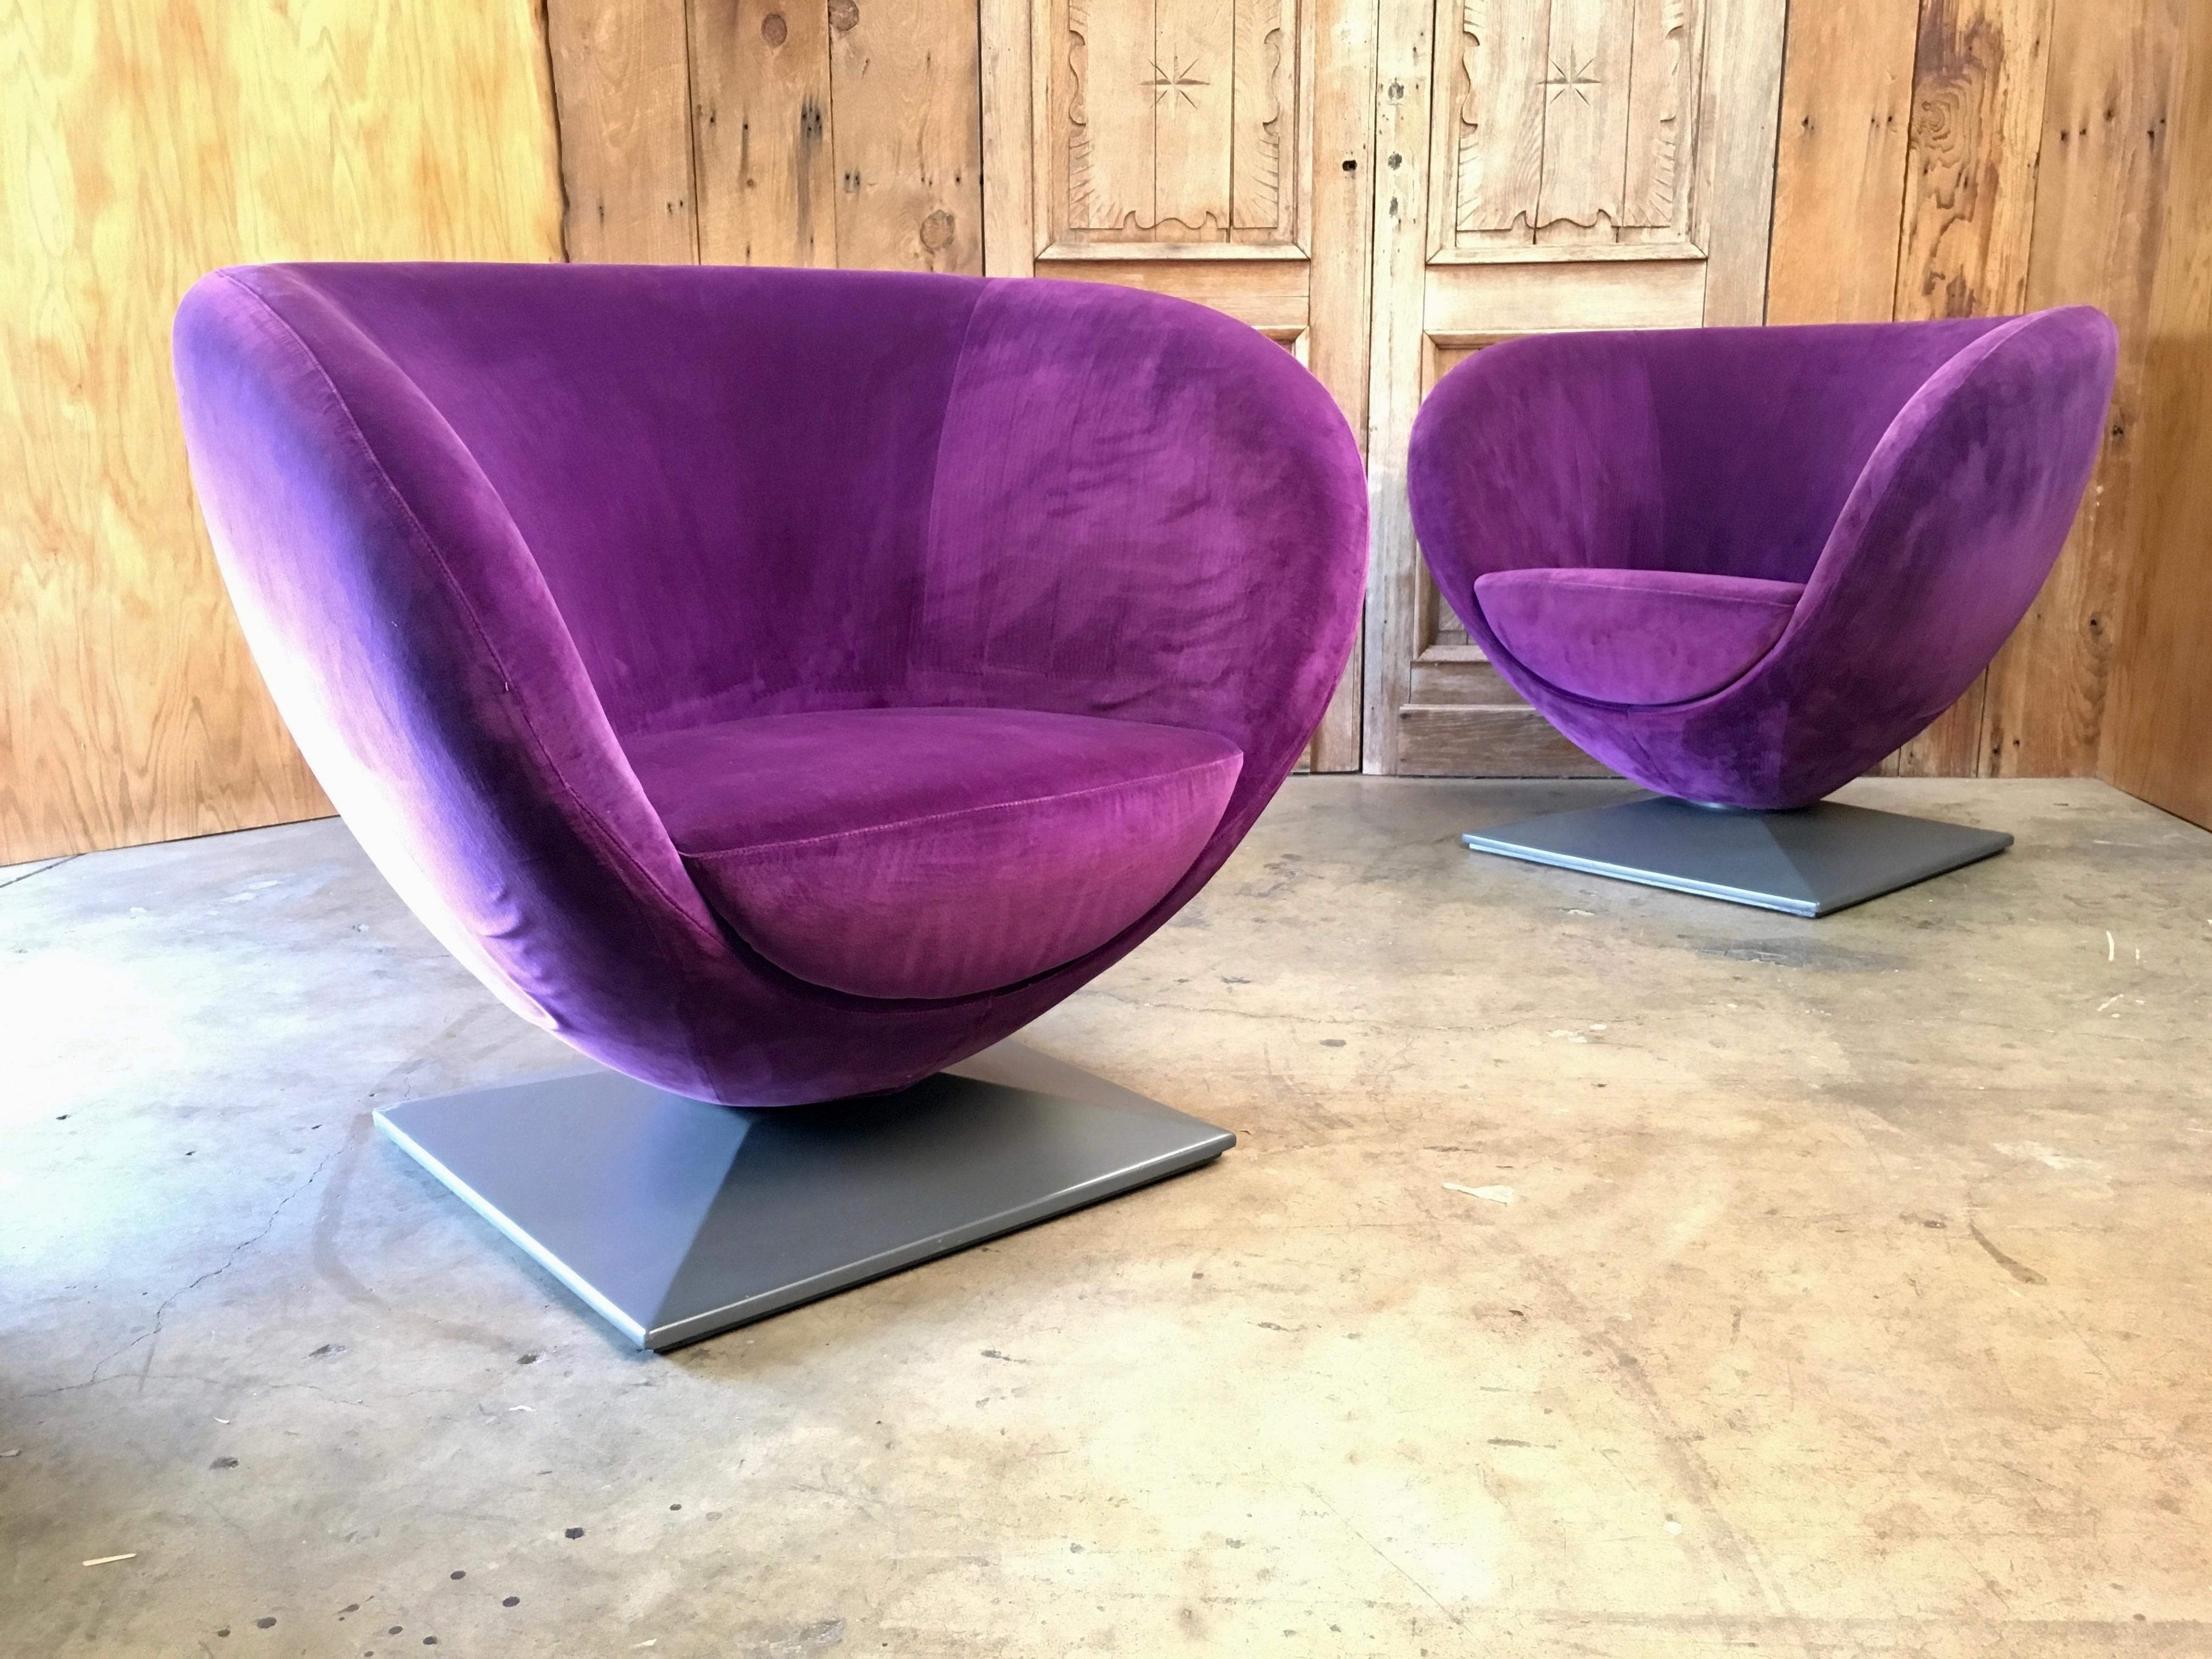 1980s Pod chairs that tilt and swivel in plum crazy velvet on grey painted pyramid bases.